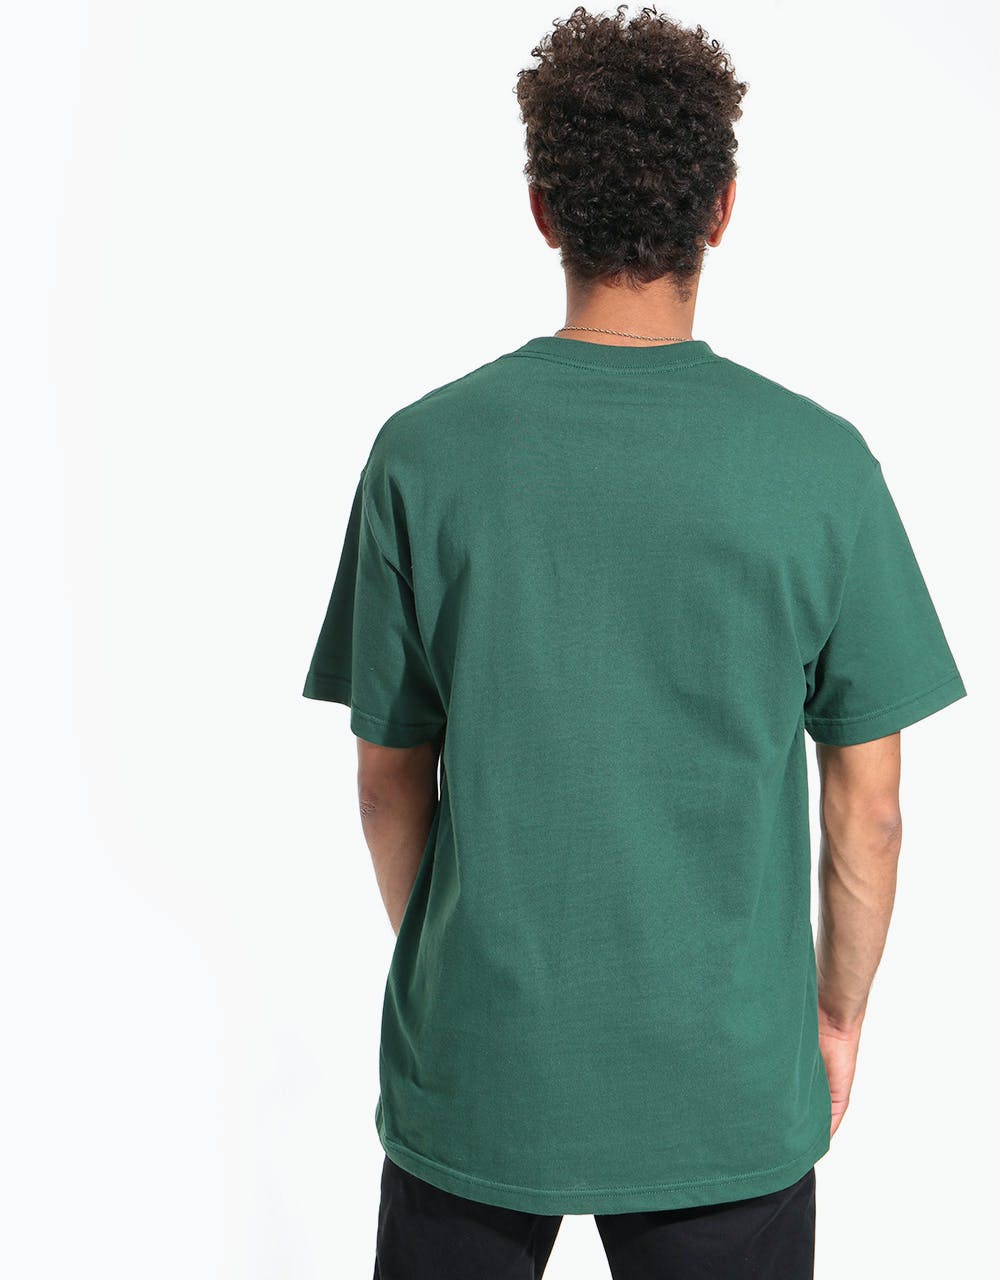 Pass Port Treasury Patch T-Shirt - Forest Green